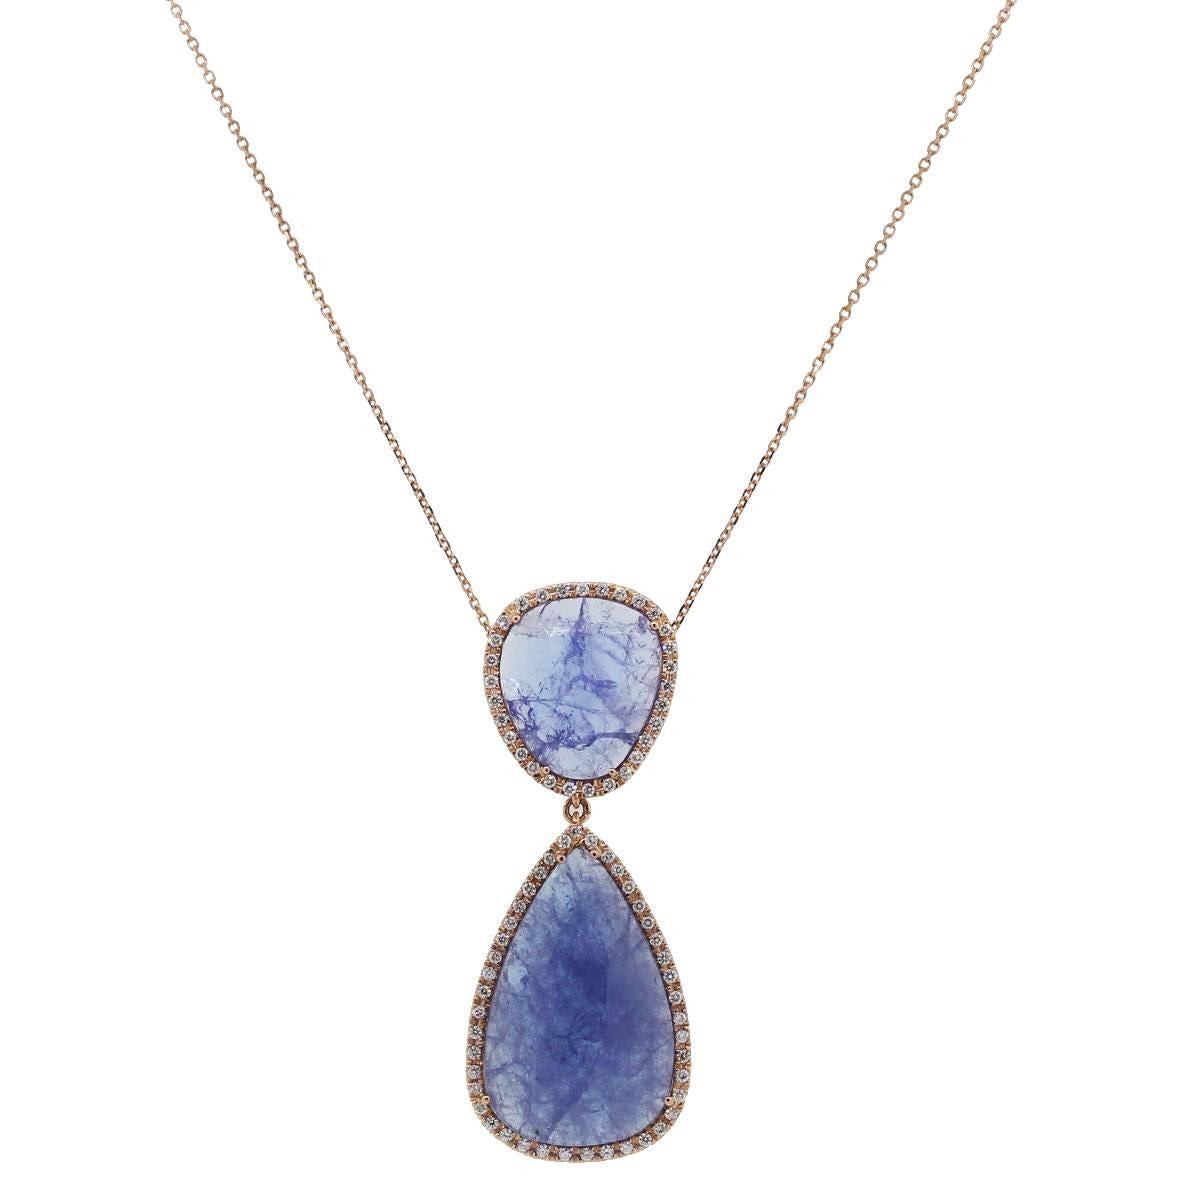 Material: 14k rose gold
Diamond Details: Approximately 0.78ctw round brilliant diamonds. Diamonds are G/H in color and VS in clarity.
Gemstones Details: Approximately 32.5ct tanzanite gemstone.
Pendant Measurements: 0.80″ x 0.25″ x 2.30″
Total